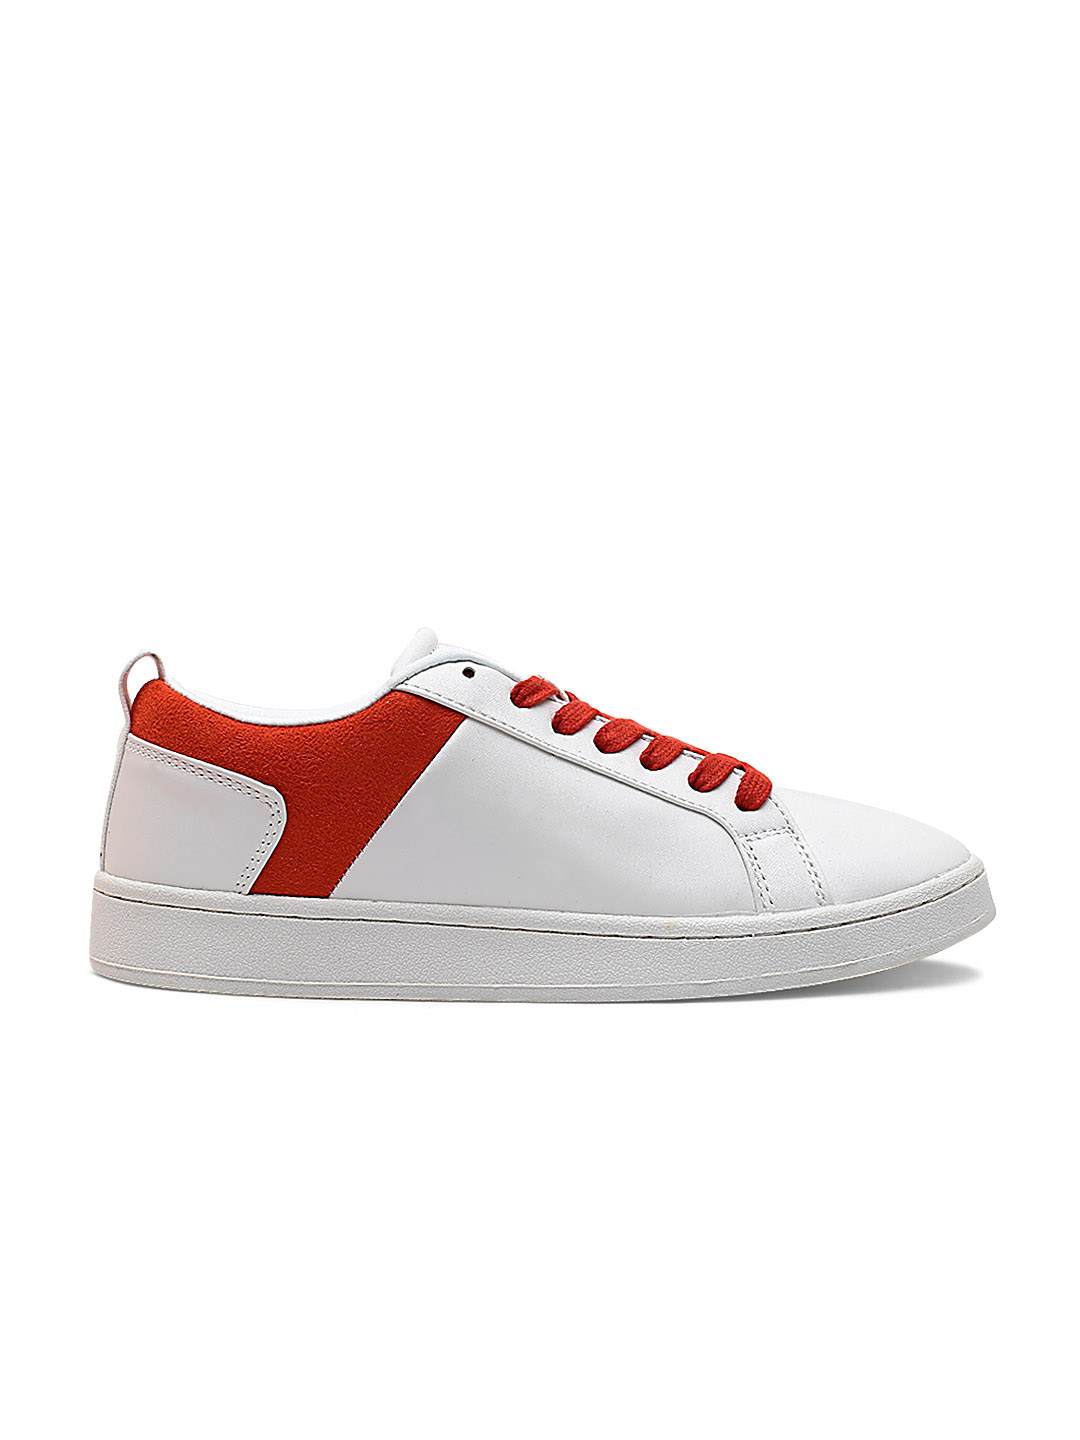 United Colors of Benetton Women White Sneakers Price in India